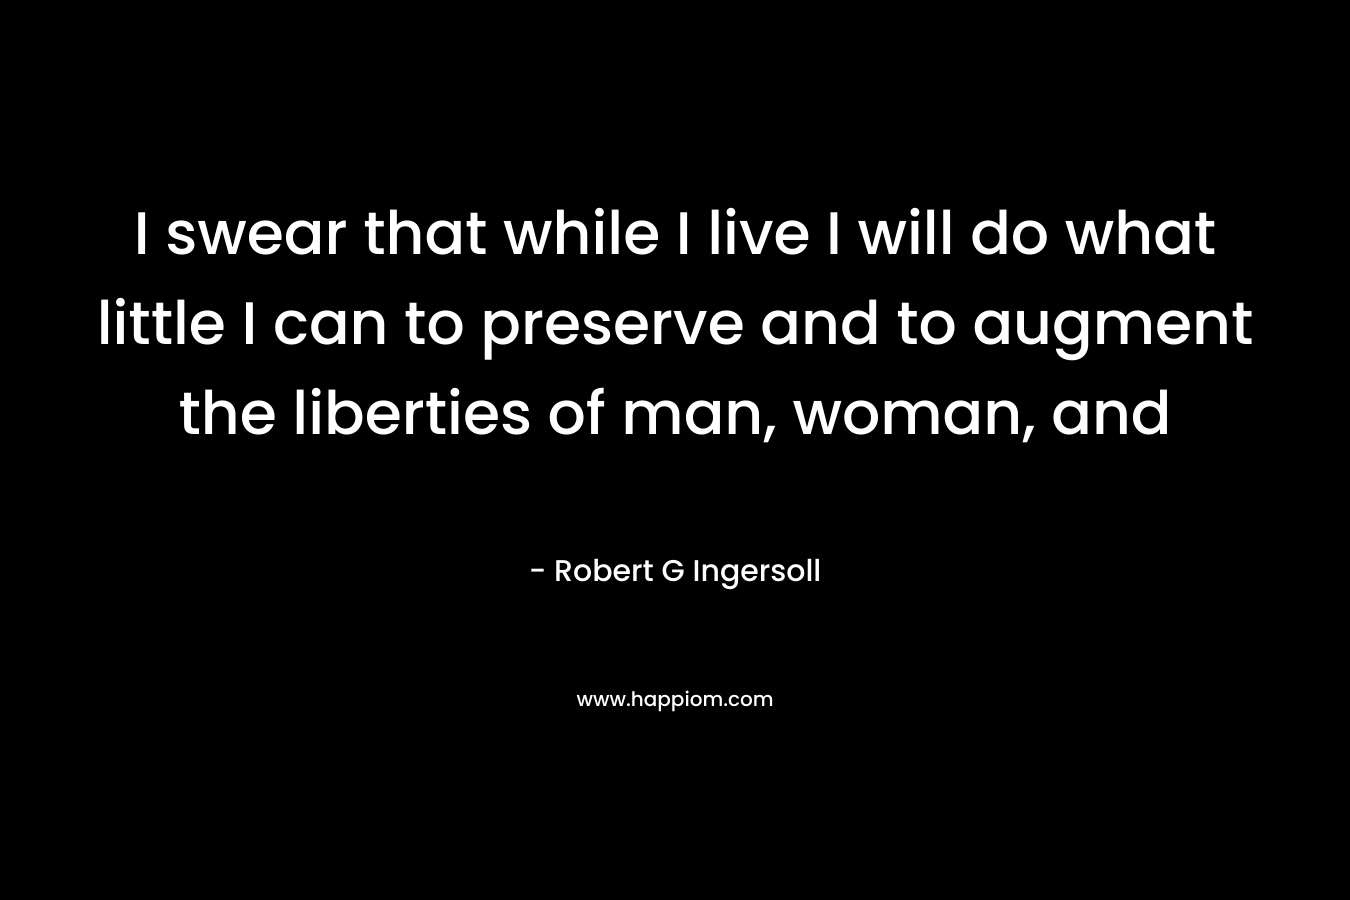 I swear that while I live I will do what little I can to preserve and to augment the liberties of man, woman, and 